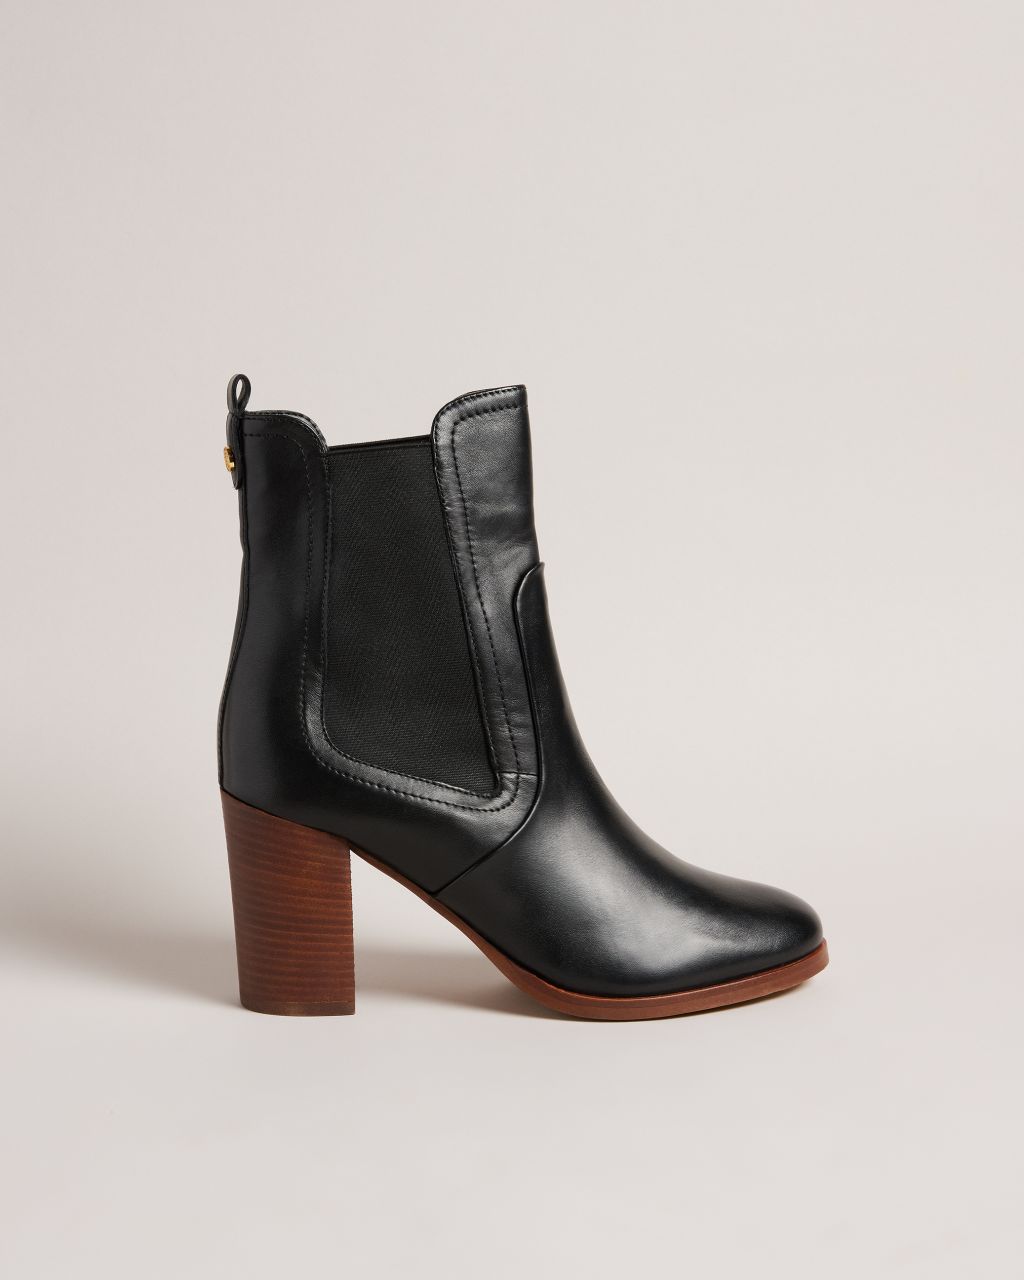 Ted Baker Women's Leather Heeled Chelsea Boots in Black, Daphina